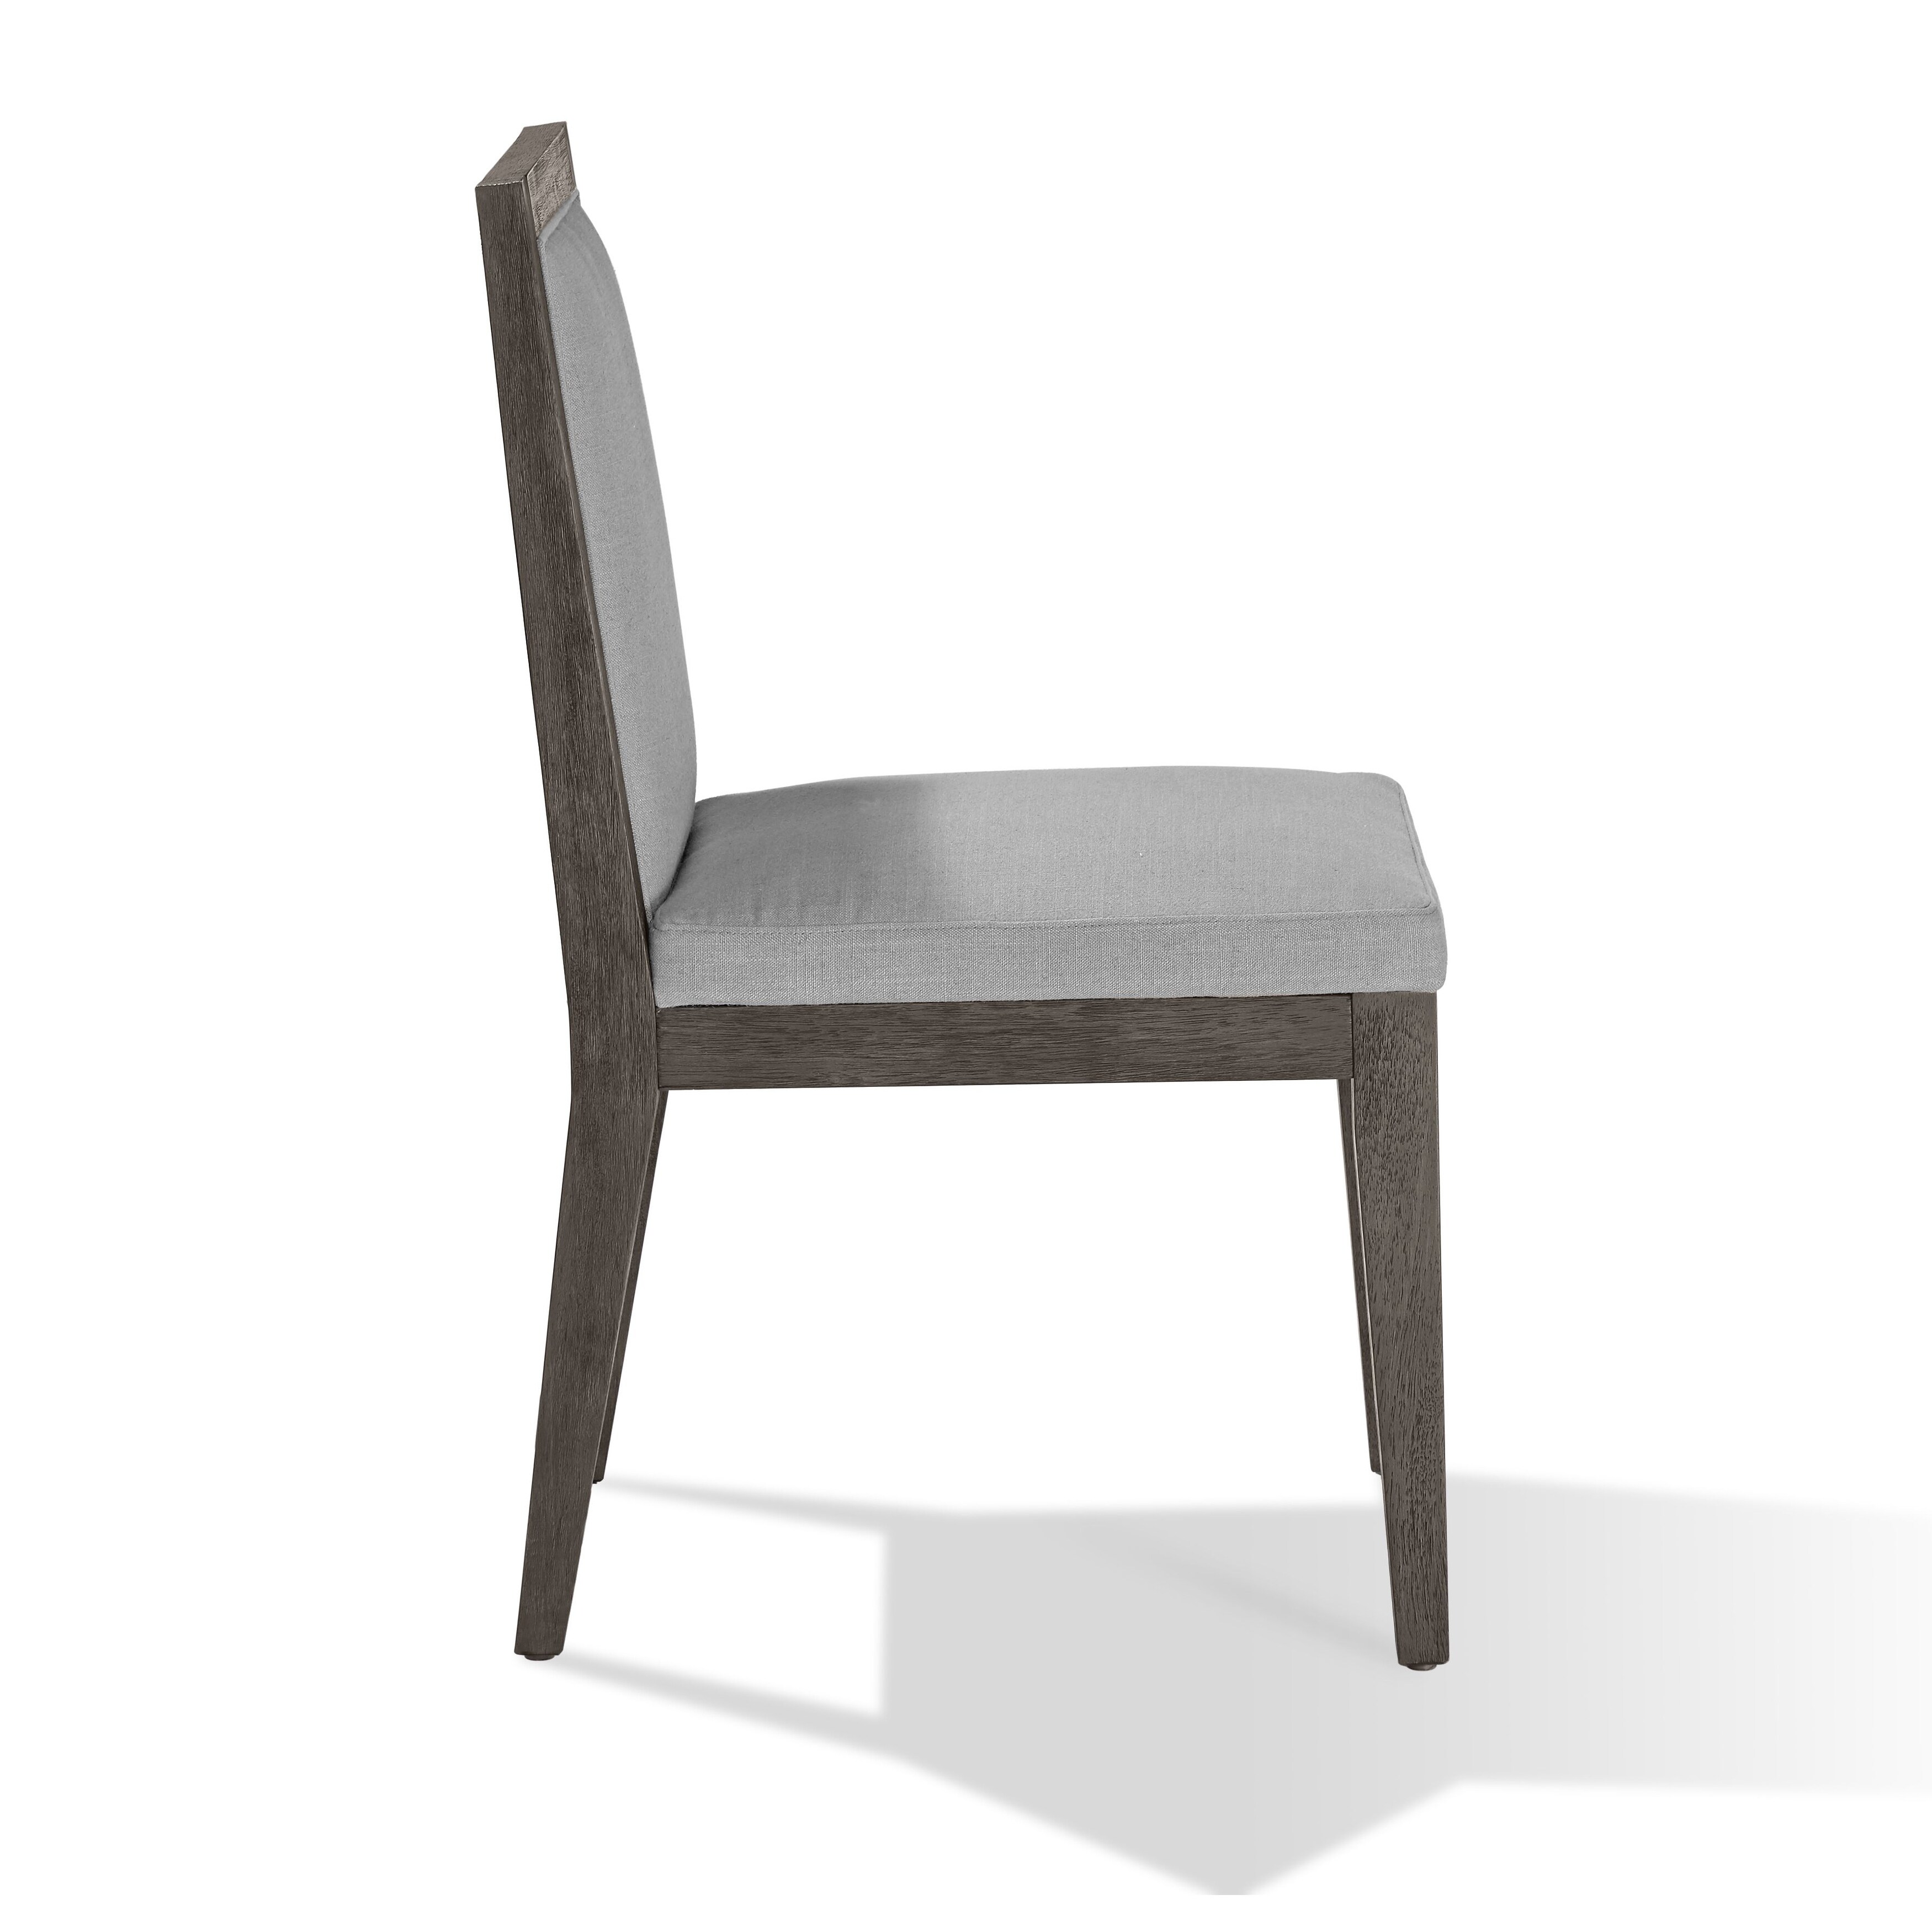 Modesto Wood Framed Side Chair in French Roast